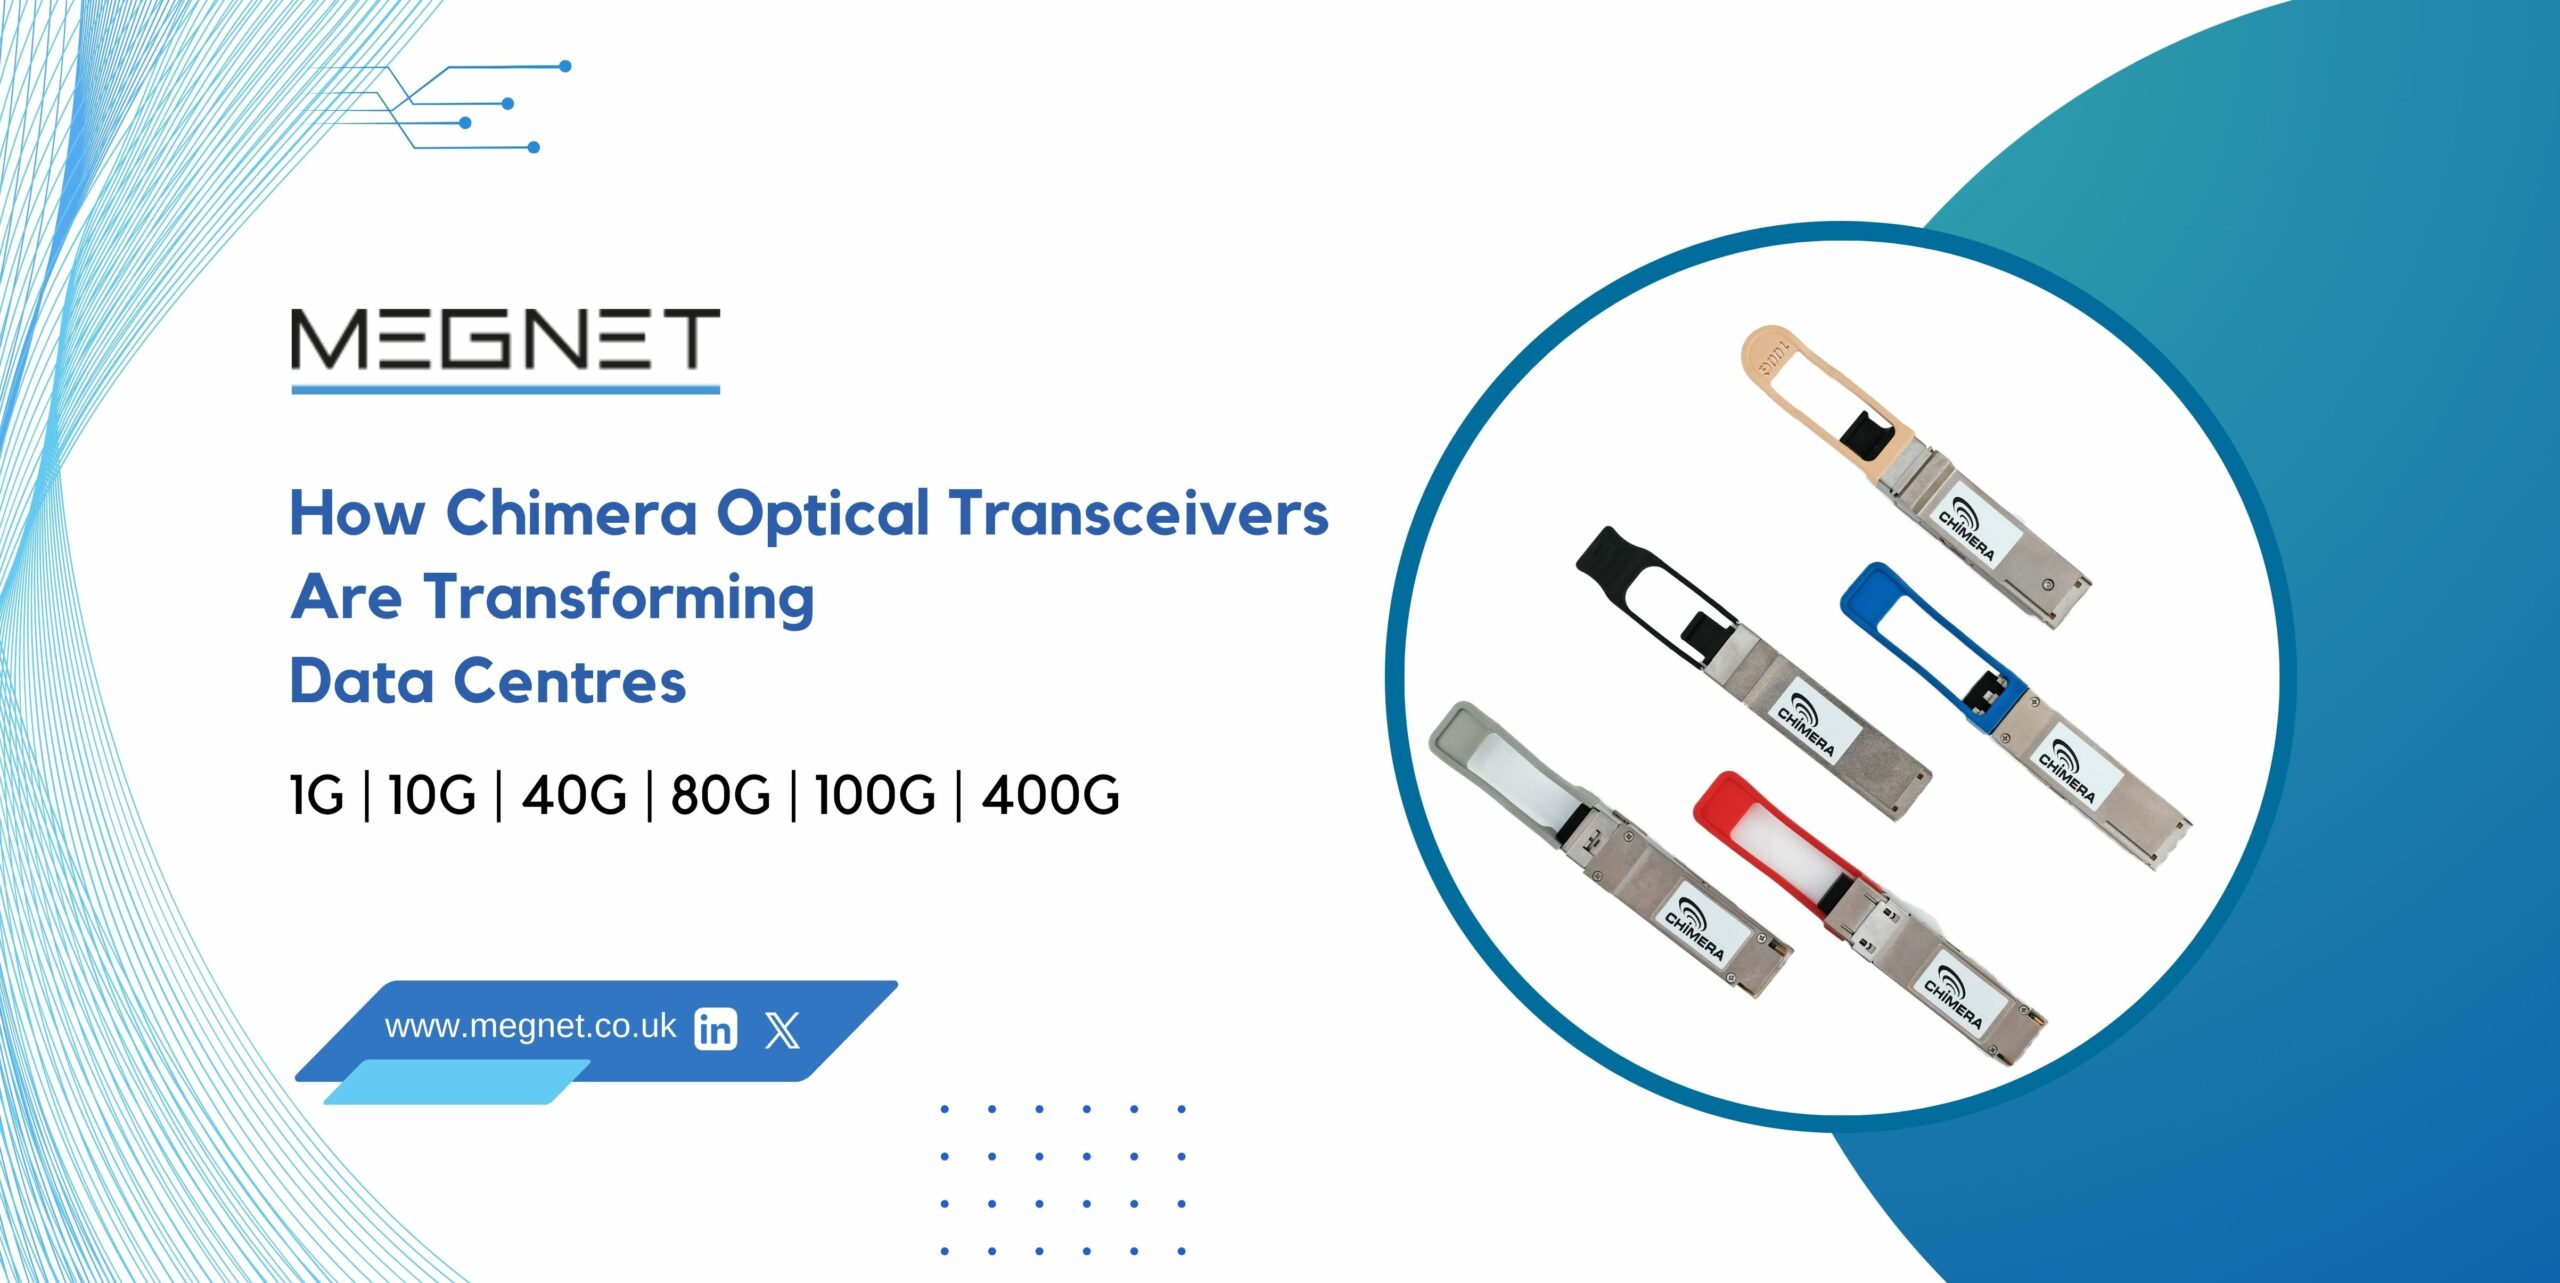 Chimera Optical Transceivers